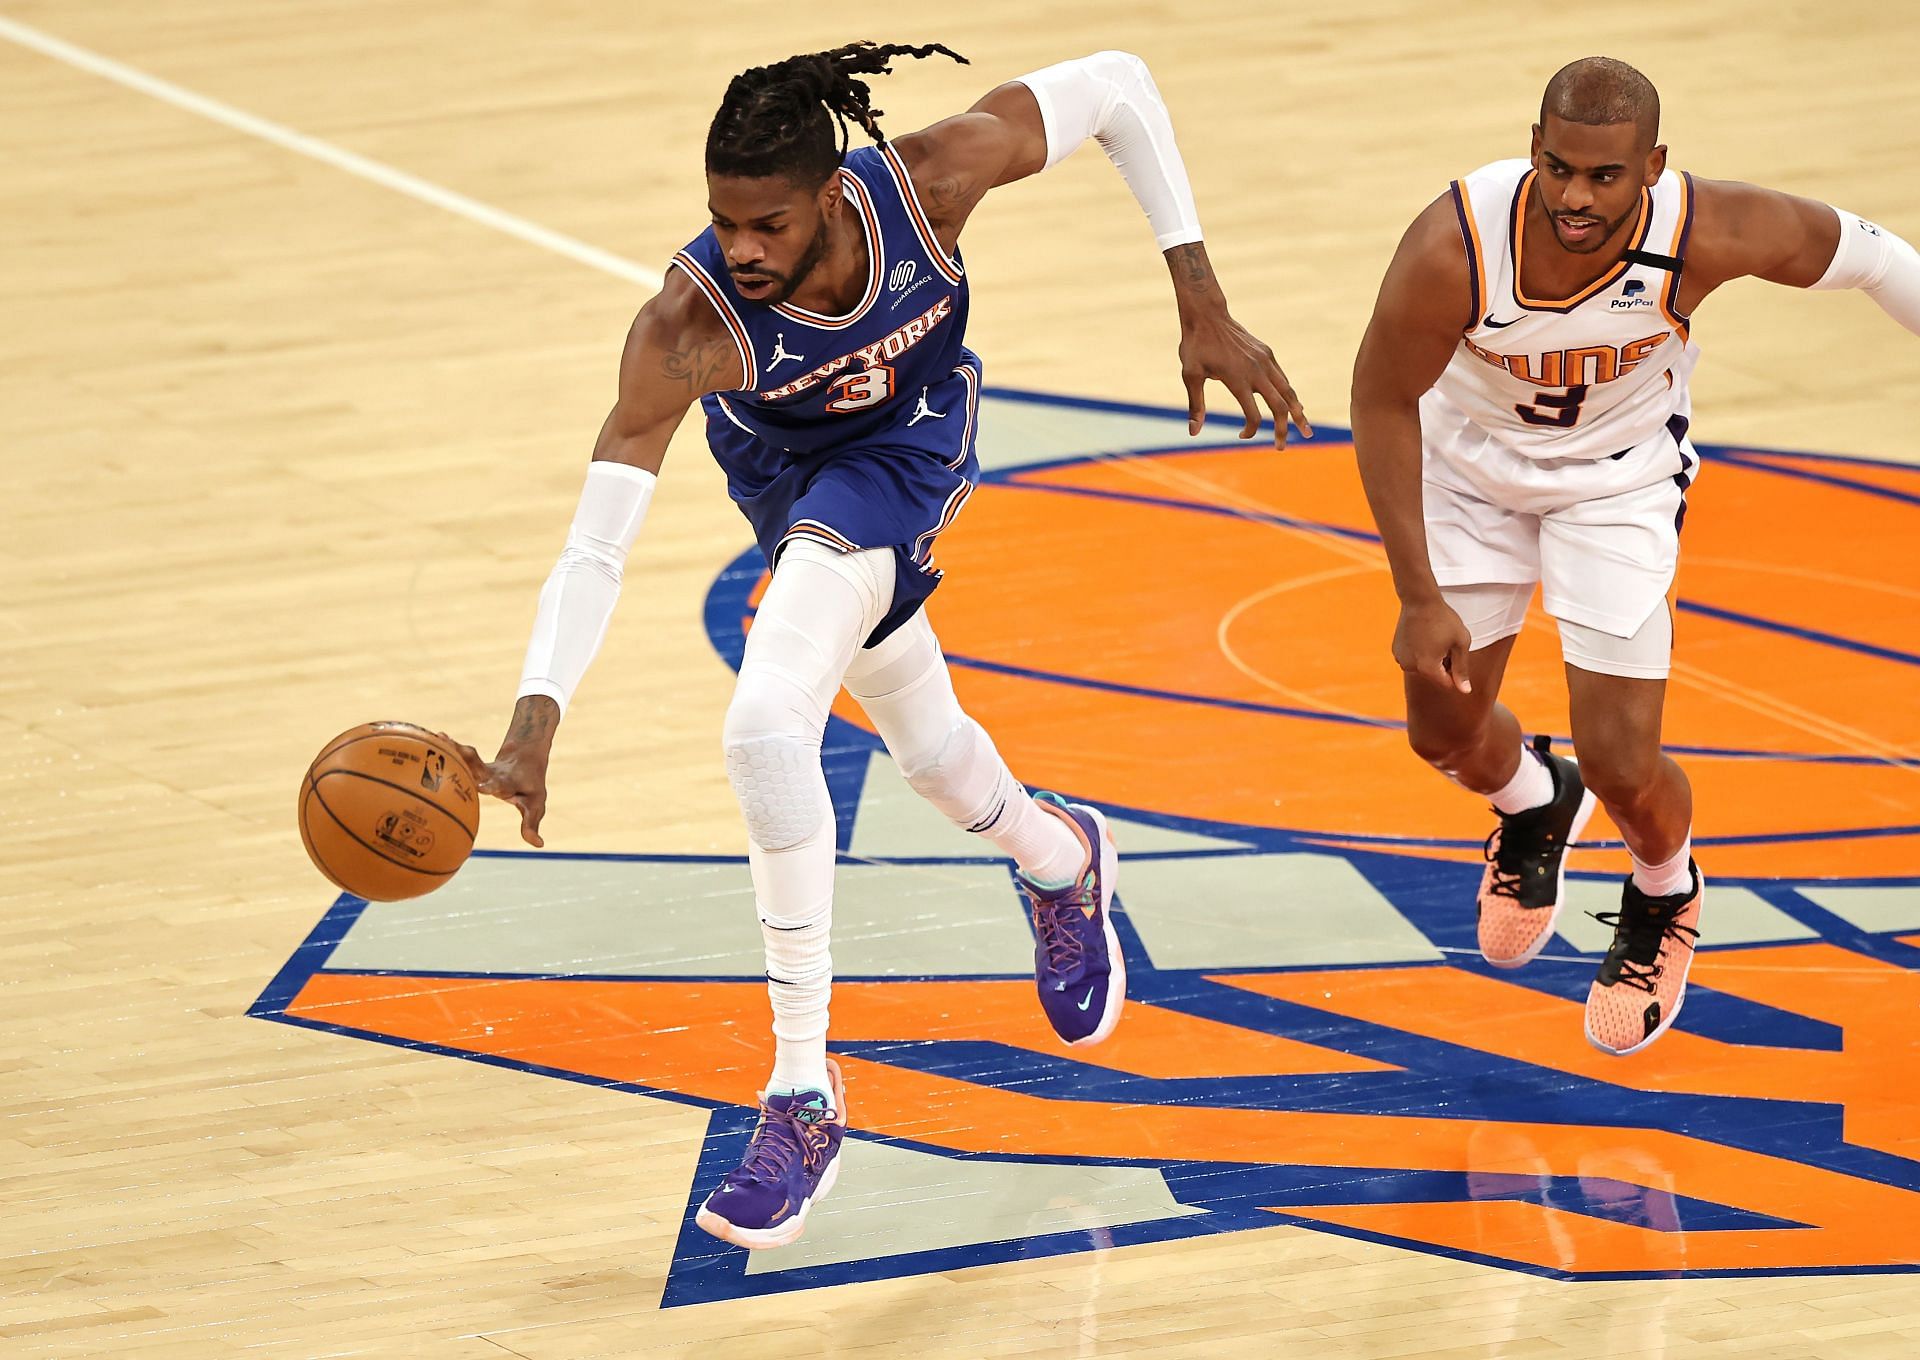 Nerlens Noel #3 of the New York Knicks steals the ball from Chris Paul #3 of the Phoenix Suns